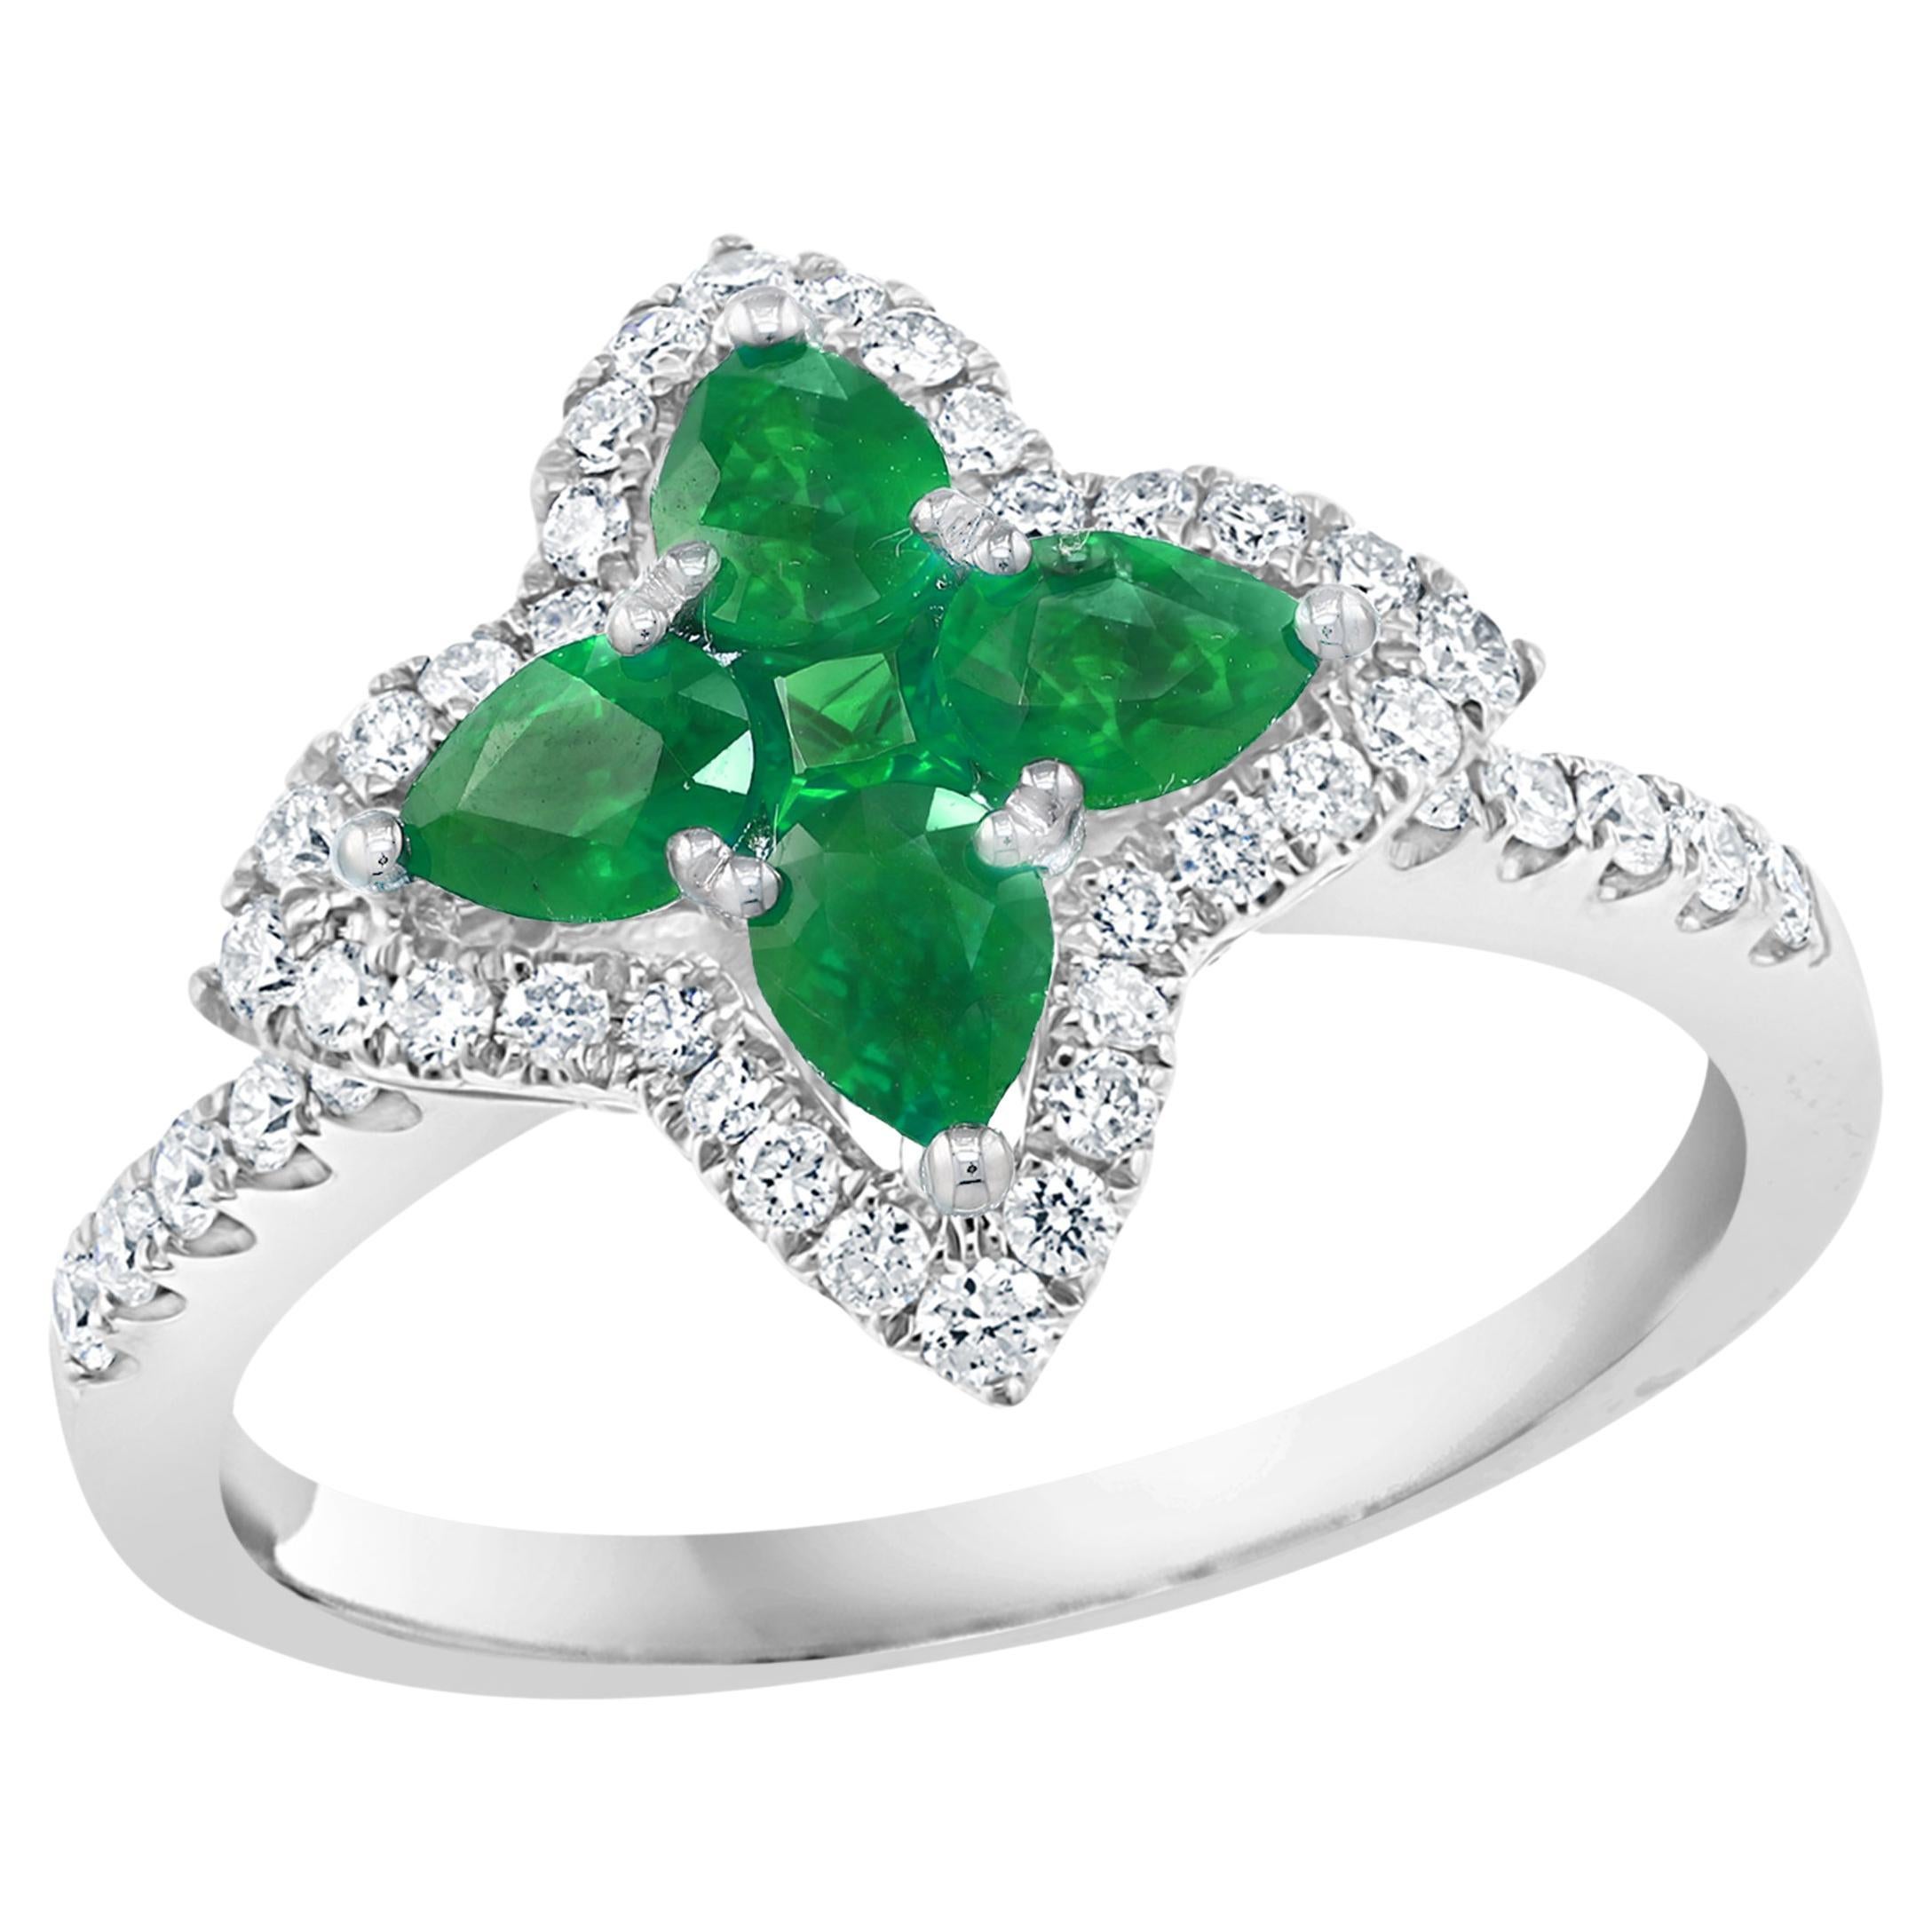 0.56 Carat Pear Shape Emerald and Diamond Cocktail Ring in 18K White Gold For Sale